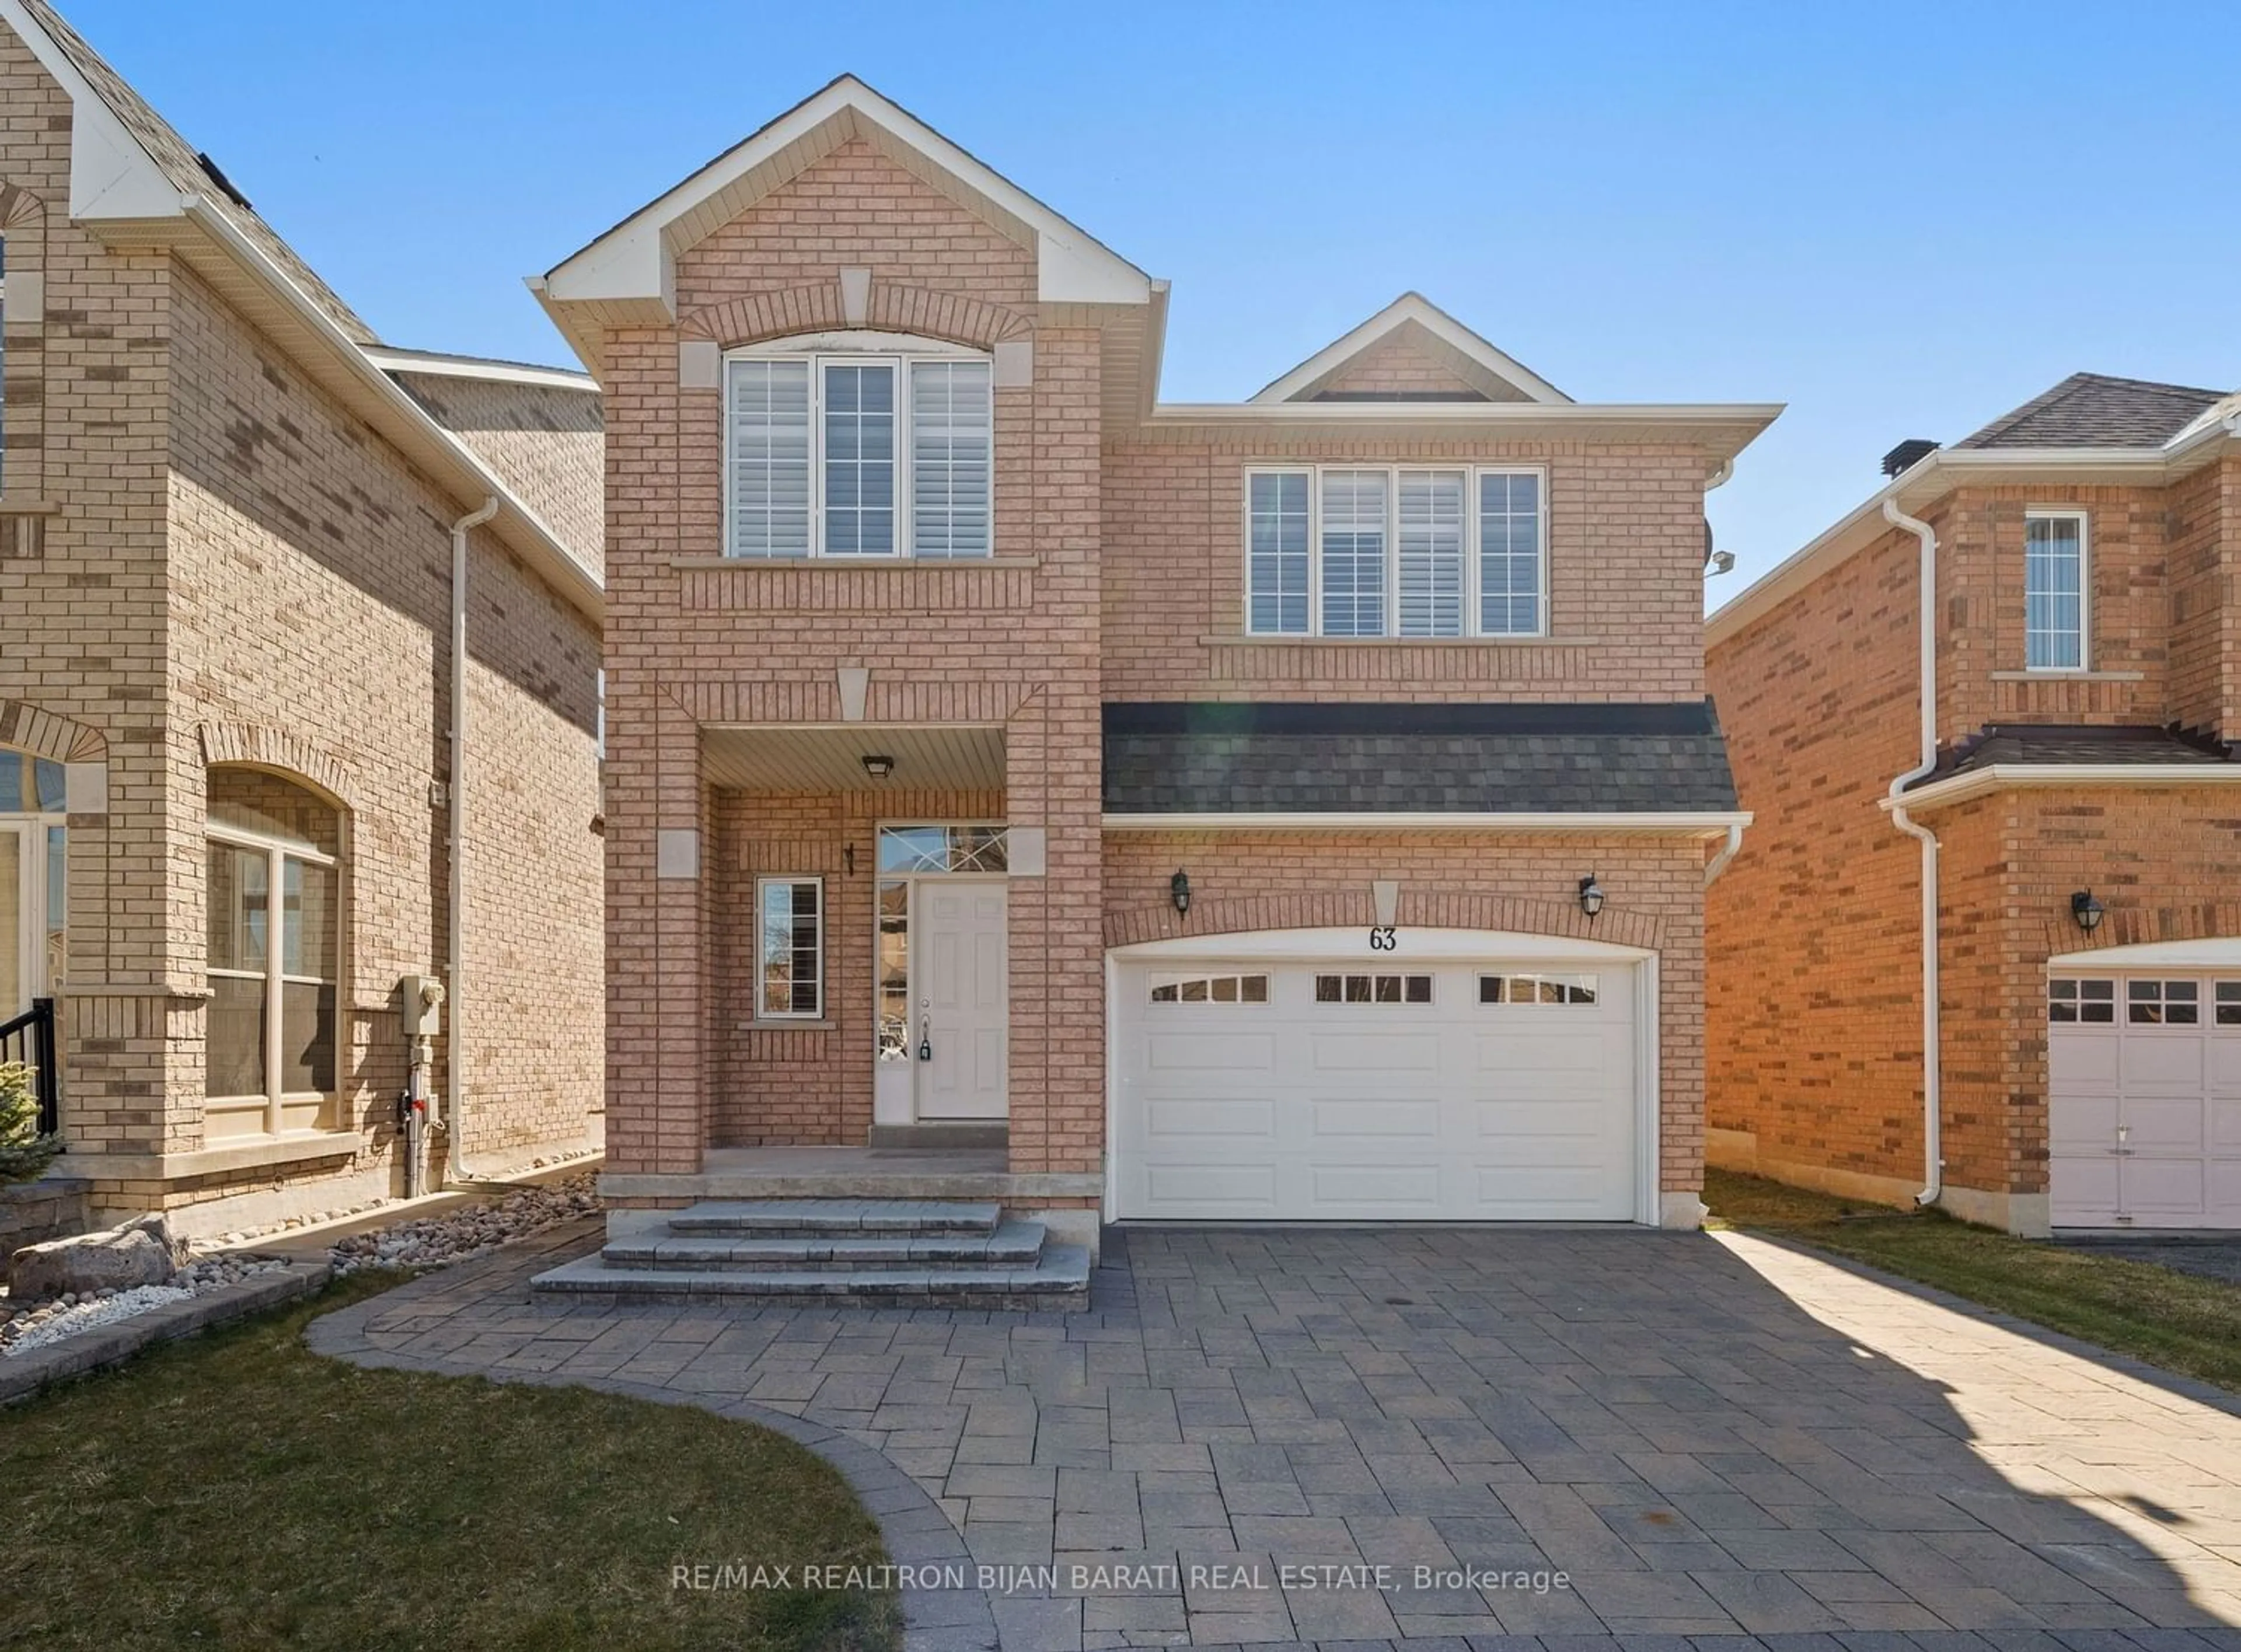 Home with brick exterior material for 63 Linda Margaret Cres, Richmond Hill Ontario L4S 2B7